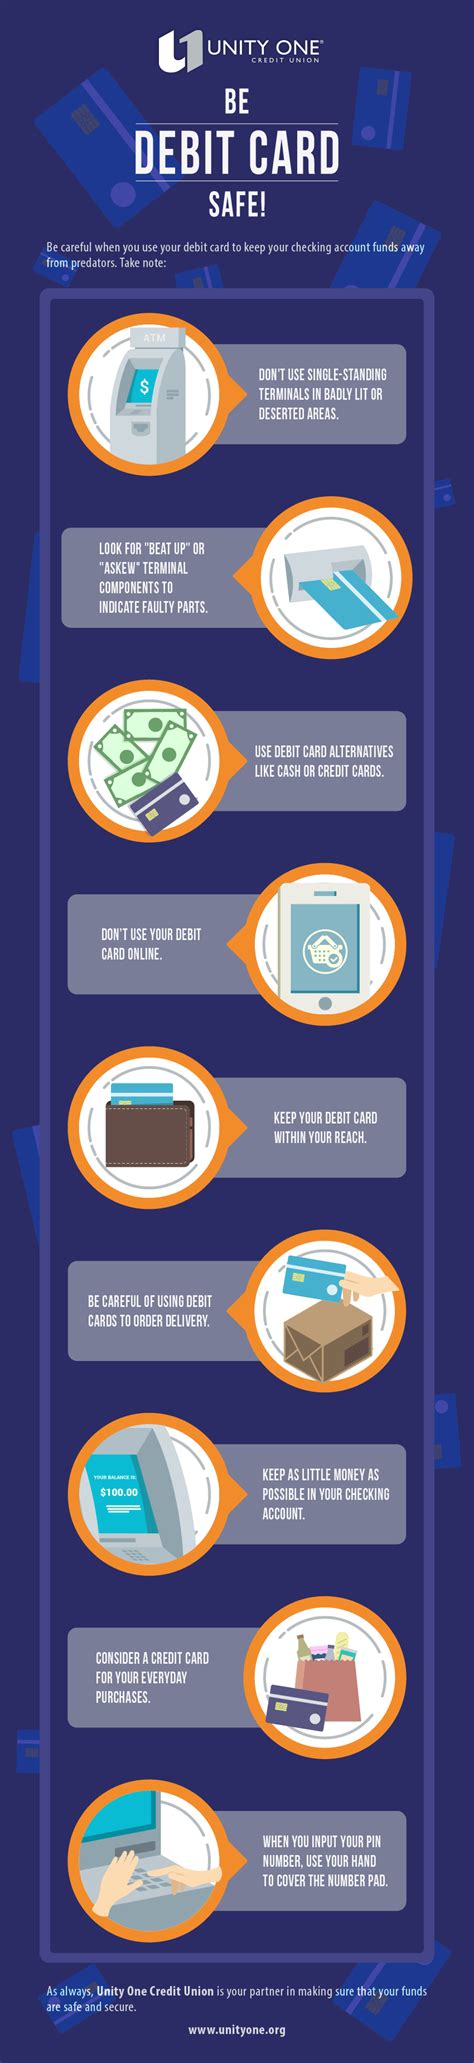 How To Be Debit Card Safe Infographic Portal Debit Card Cards